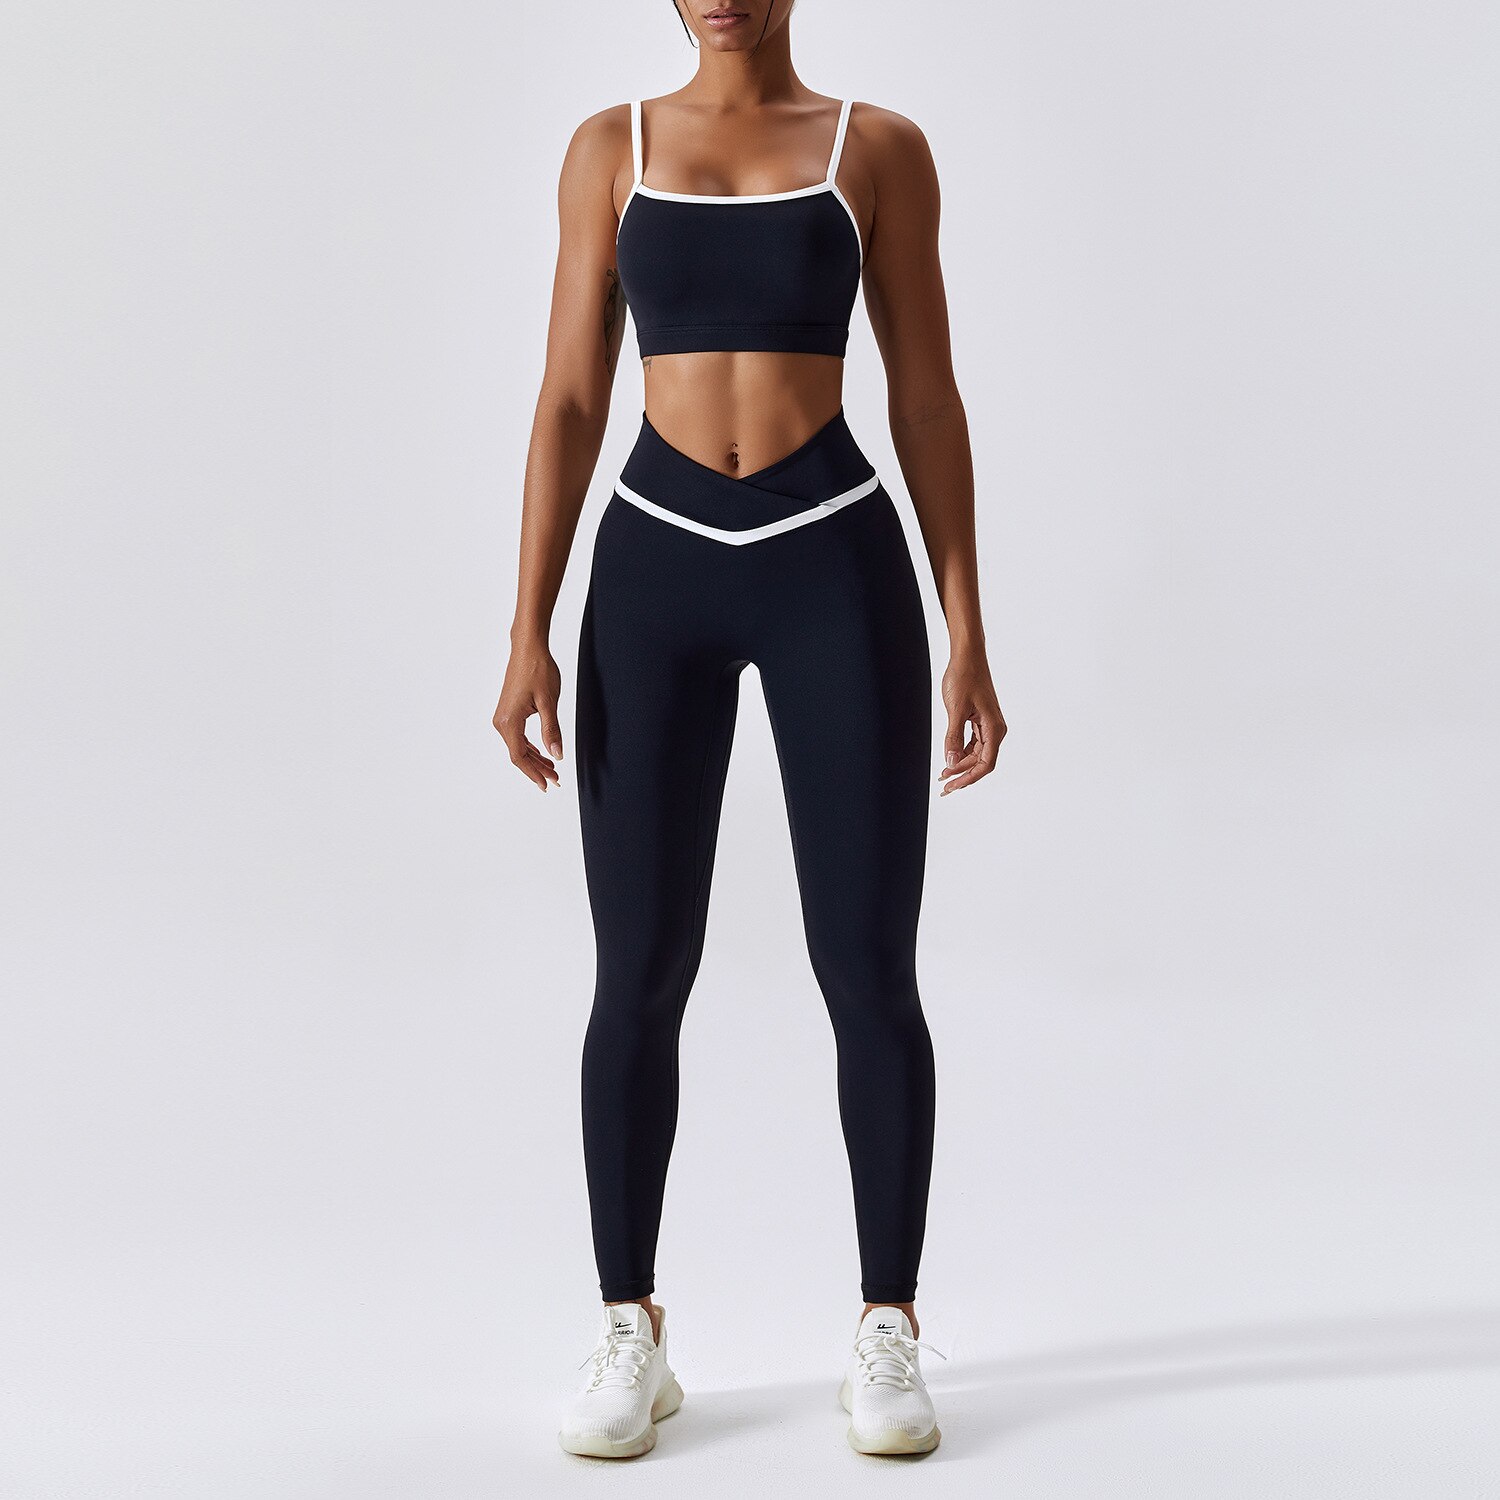 Yoga-Clothing-Sets-Women-High-Waist-Leggings-And-Top-Seamless-Tracksuit-Fitness-Workout-Outfits-Gym-Sports-3